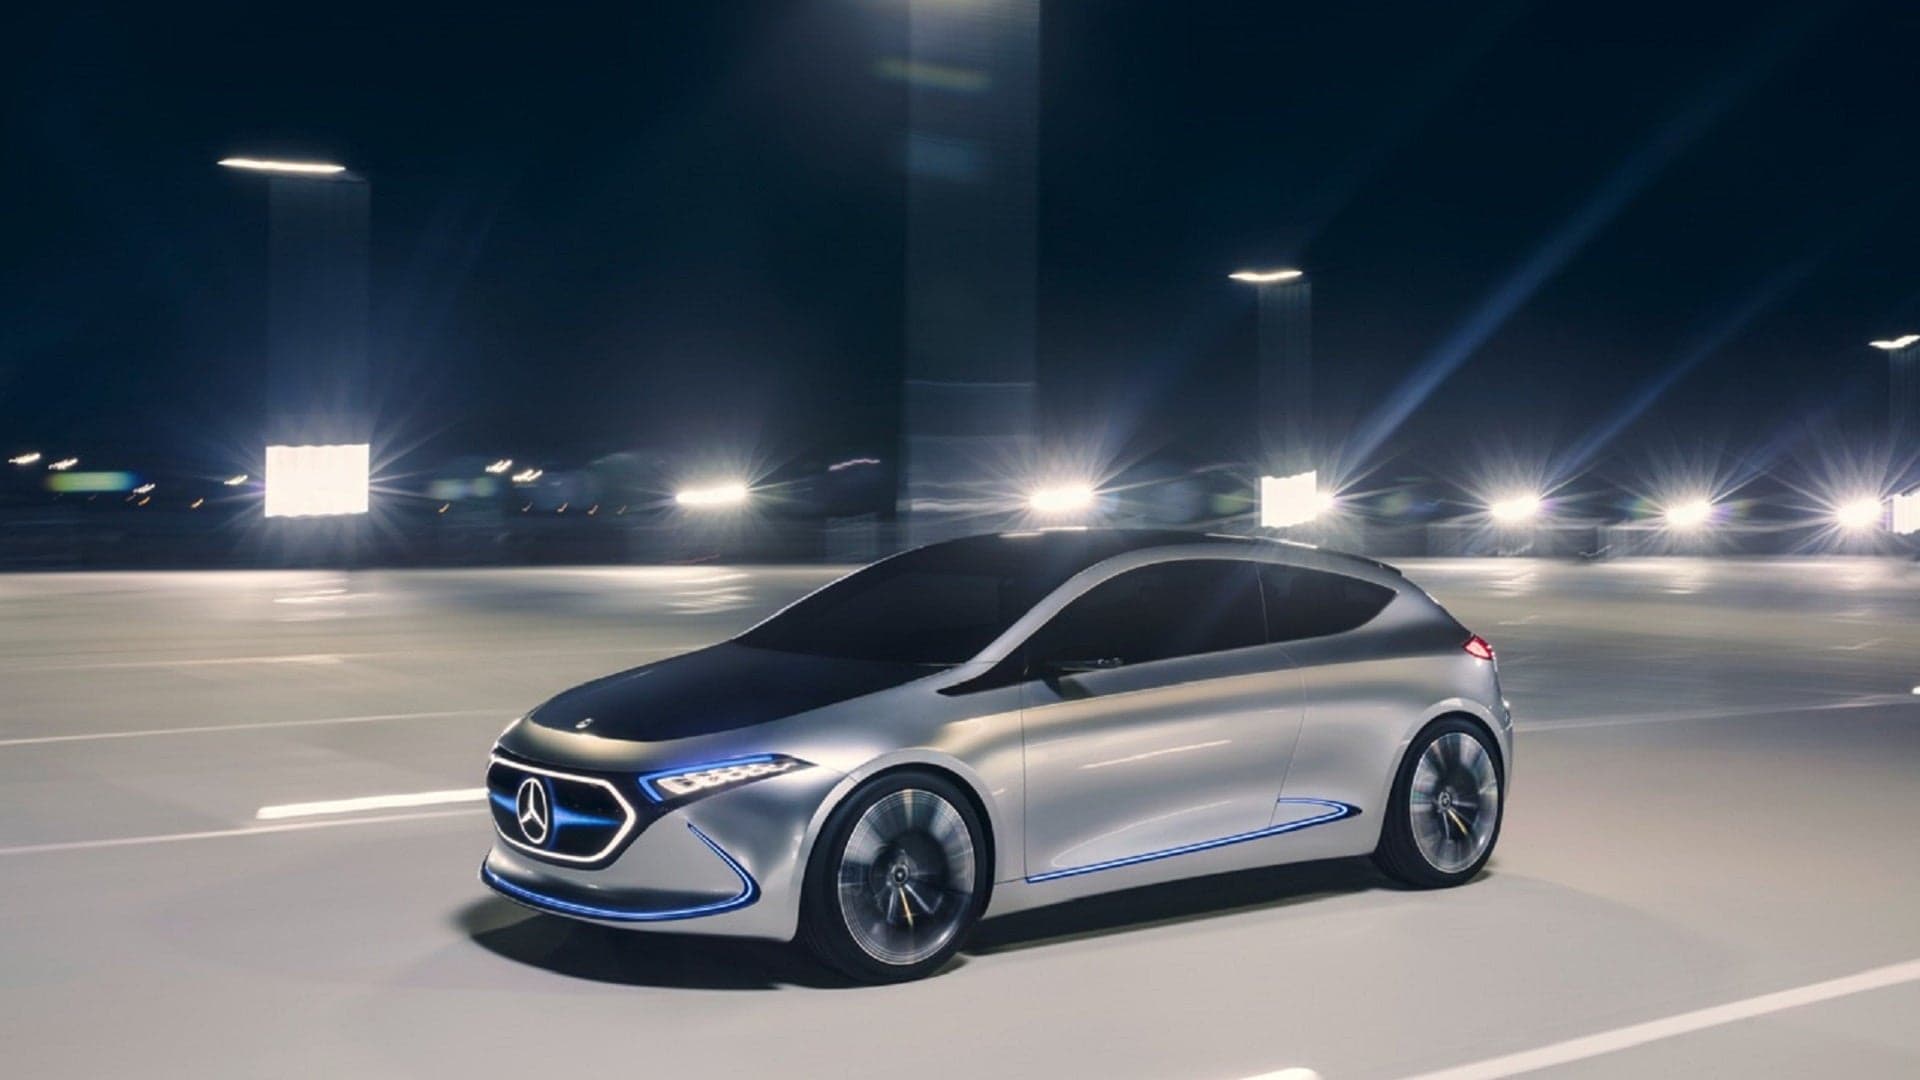 Daimler Vows to Ethically Source Battery Materials for Electric Cars